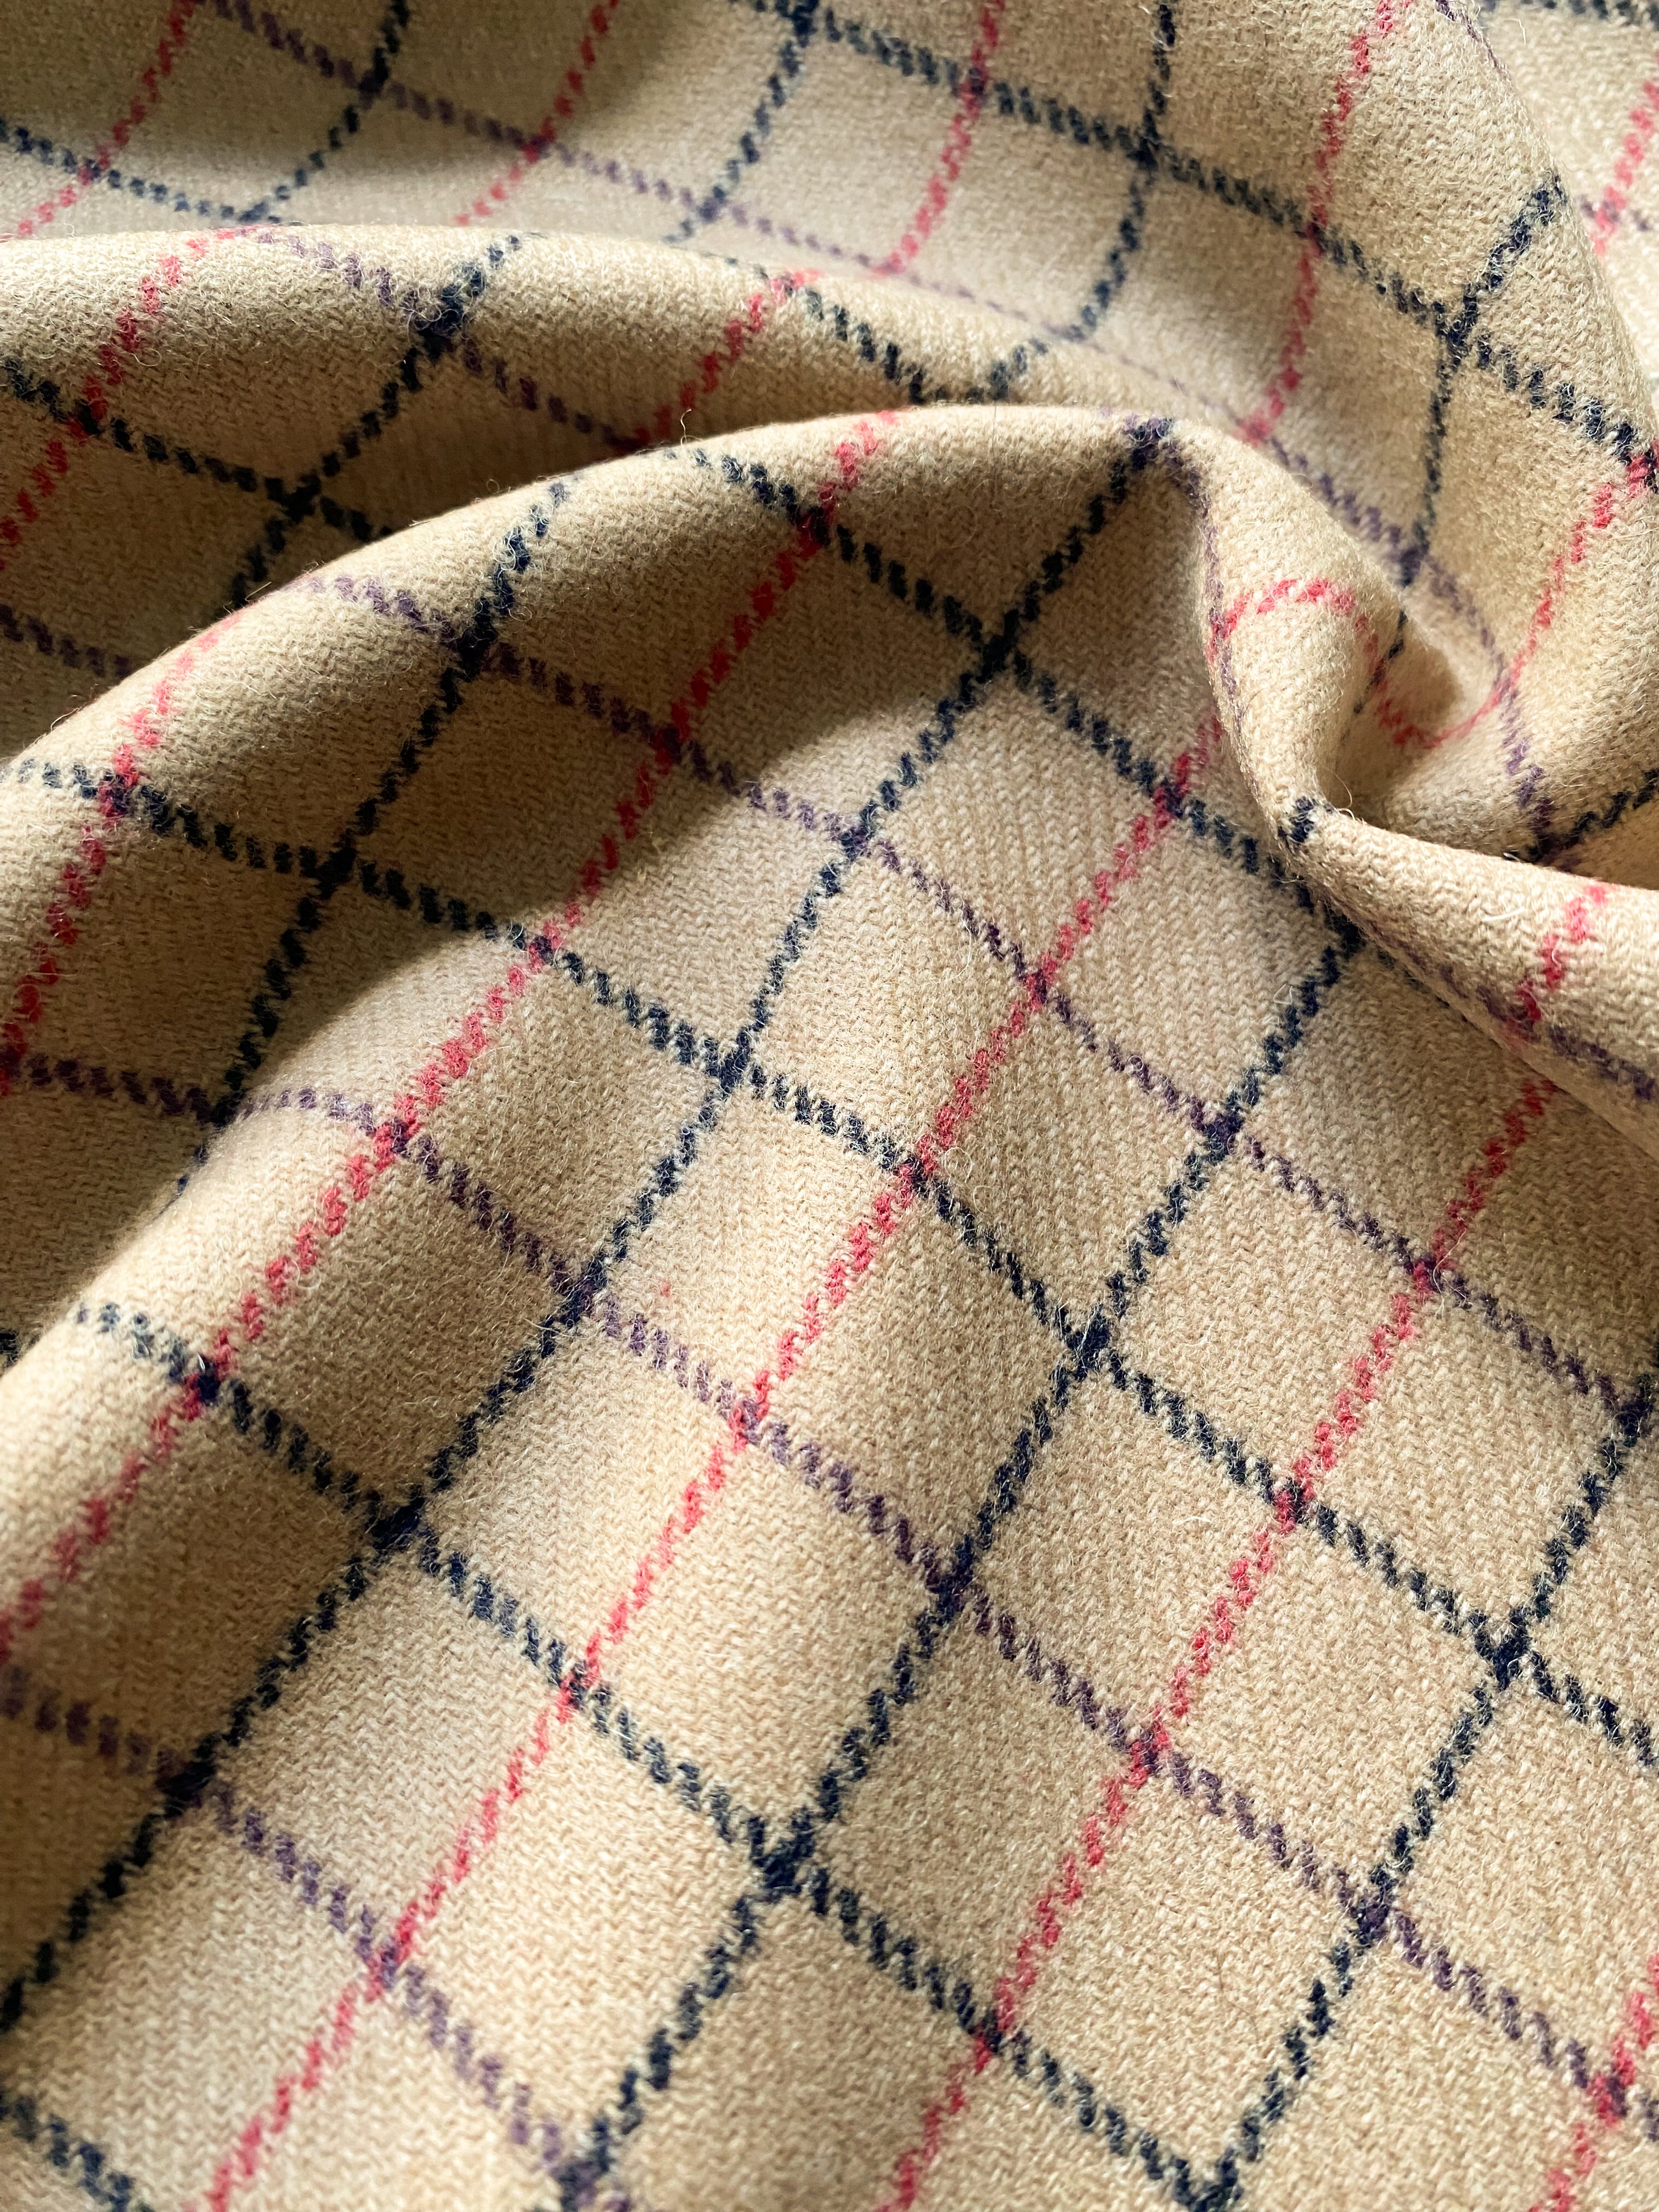 No. 1032 Wool fabric with a checked pattern